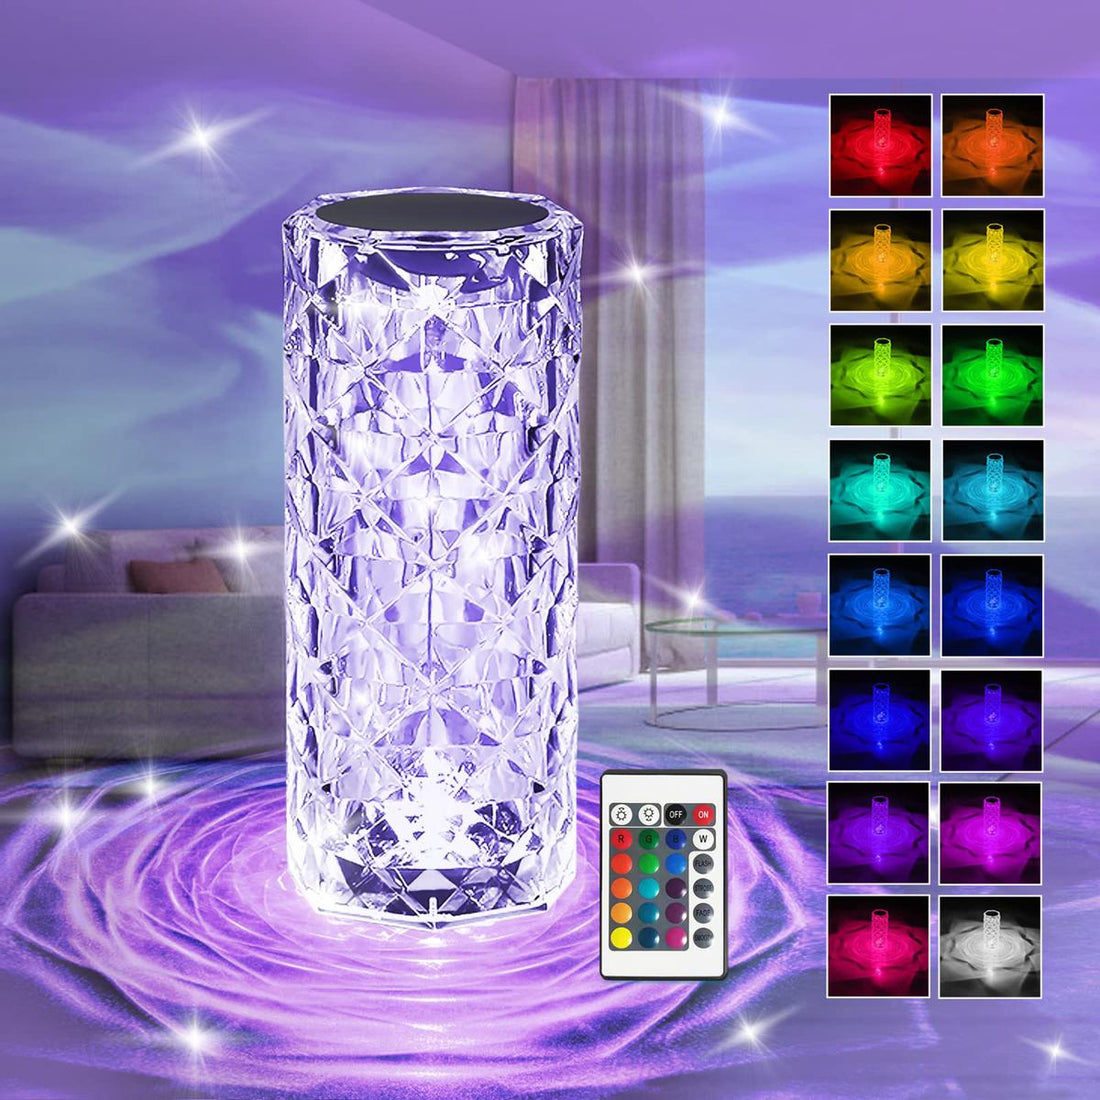 Sparkling Elegance: Crystal Lamp Rose Light Diamond Lamp with 16 Colors Changing